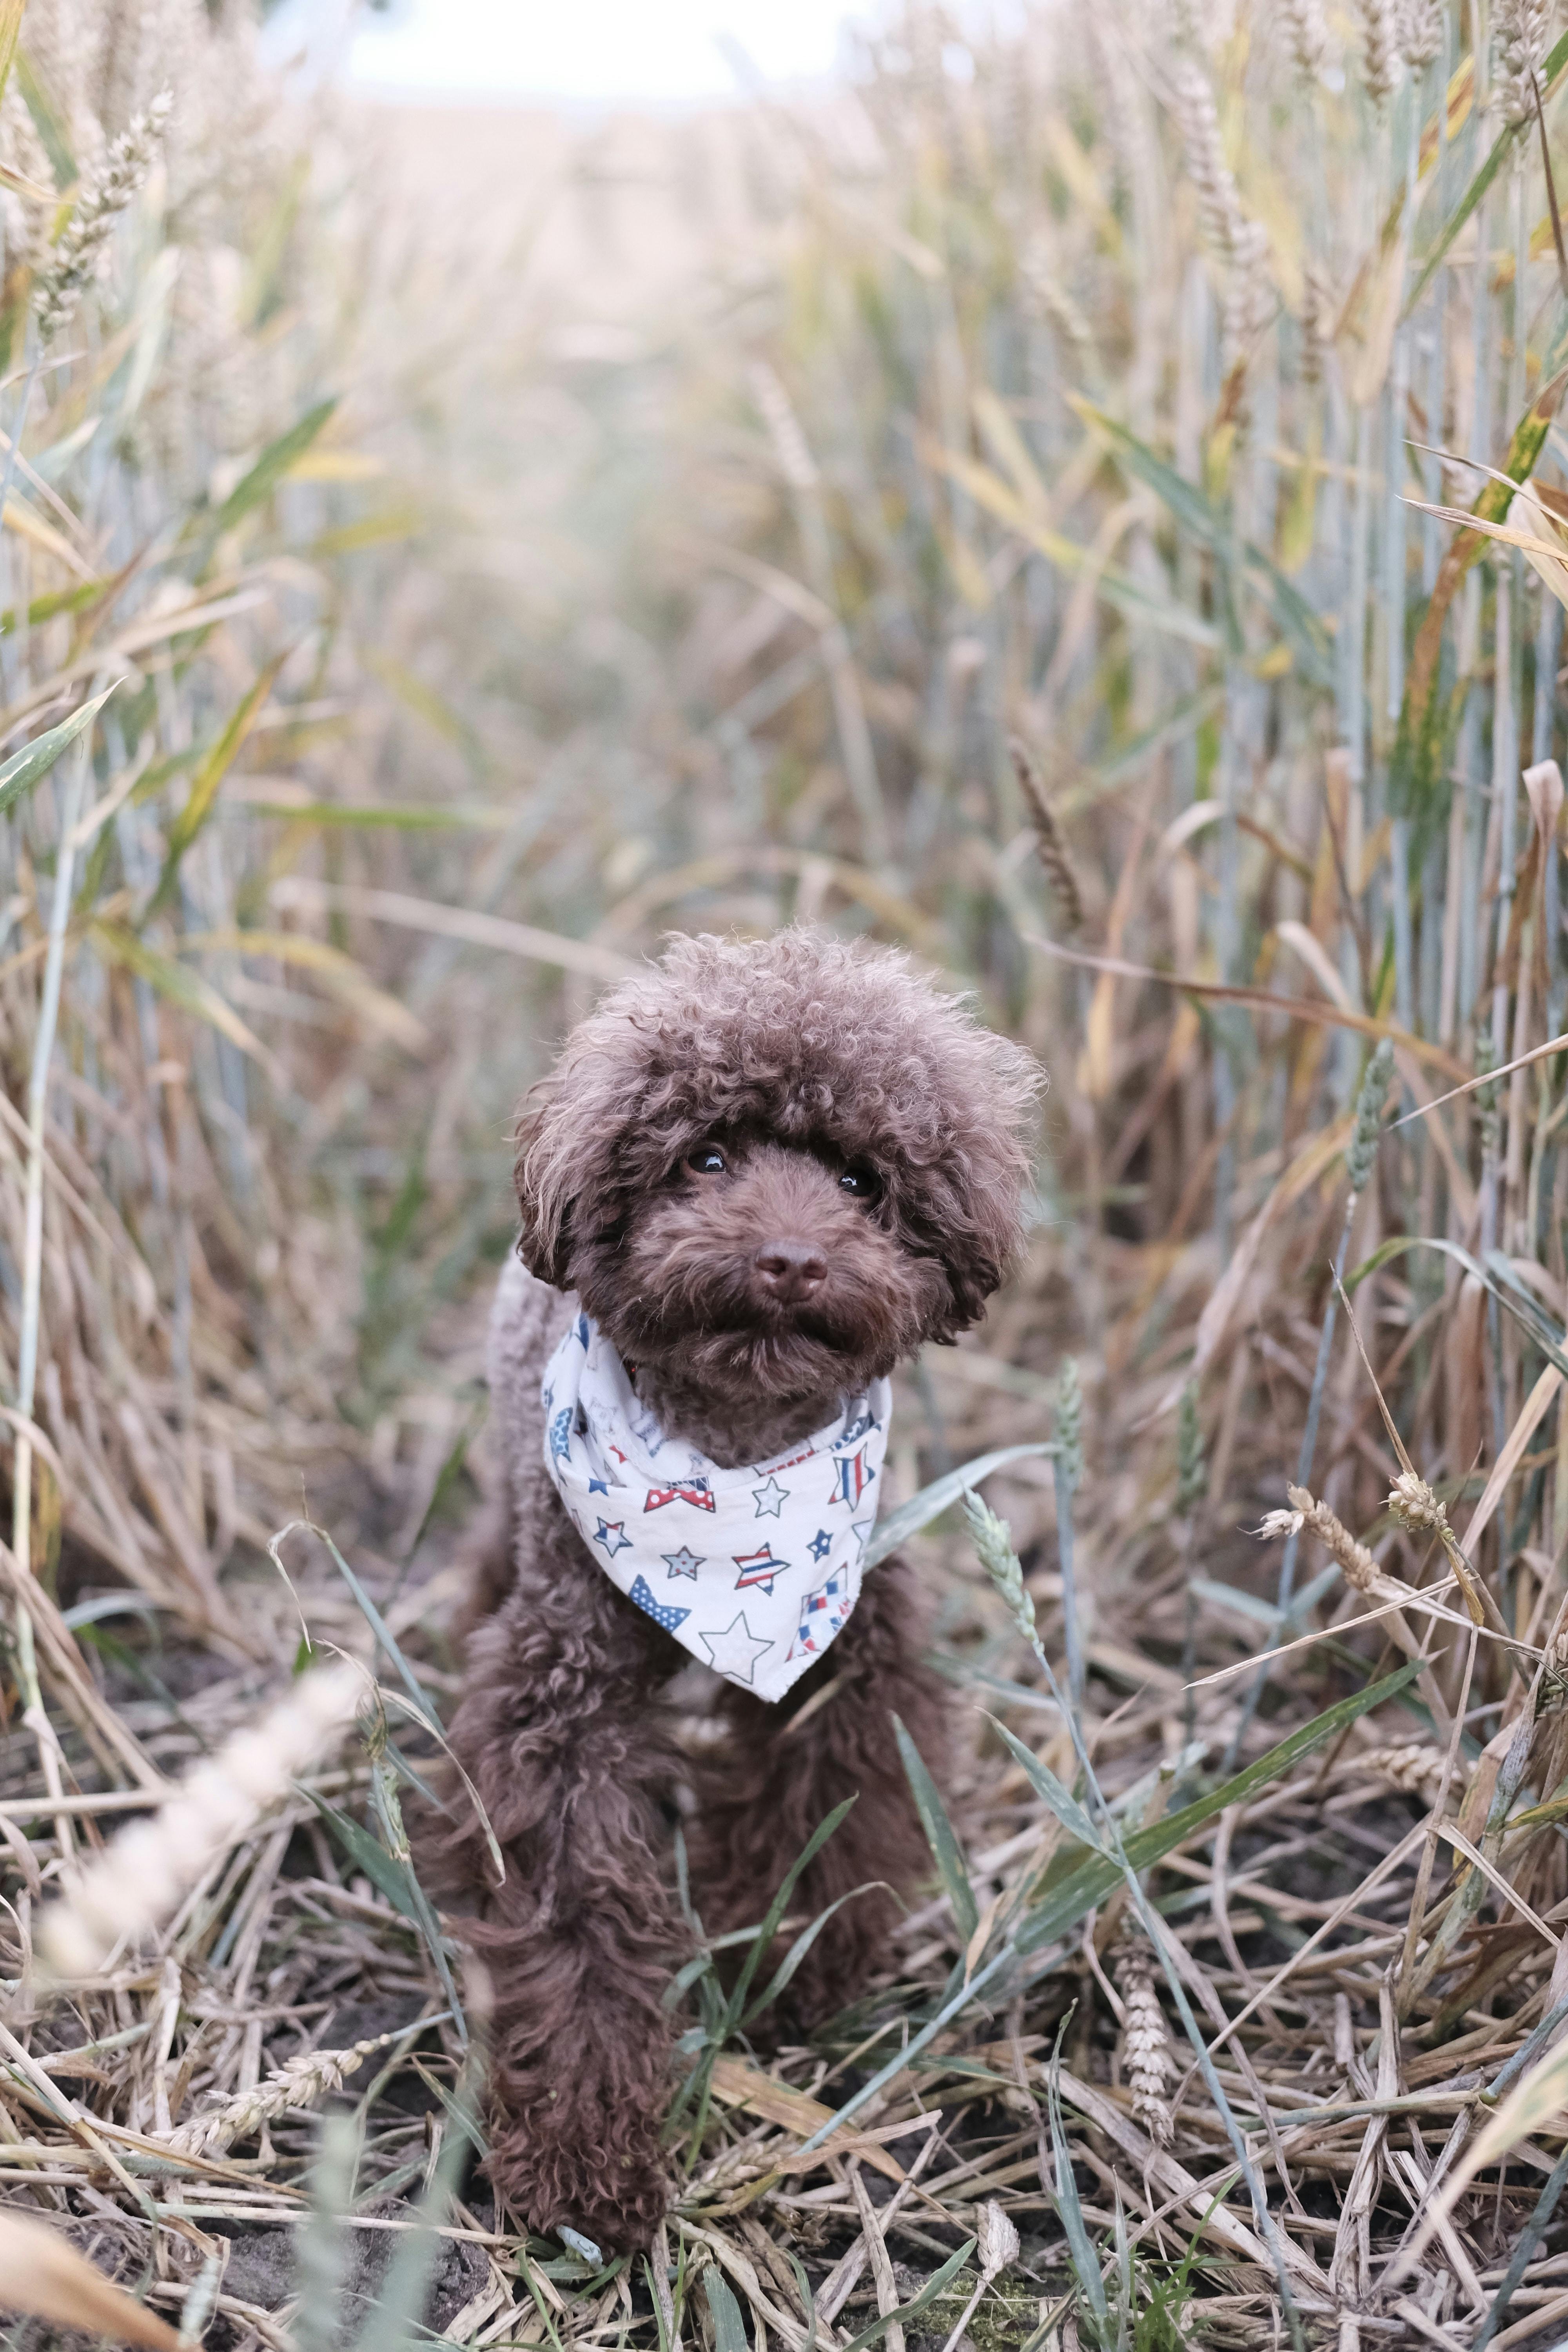 Poodle mix puppy wearing a bandana and standing in a field of grass